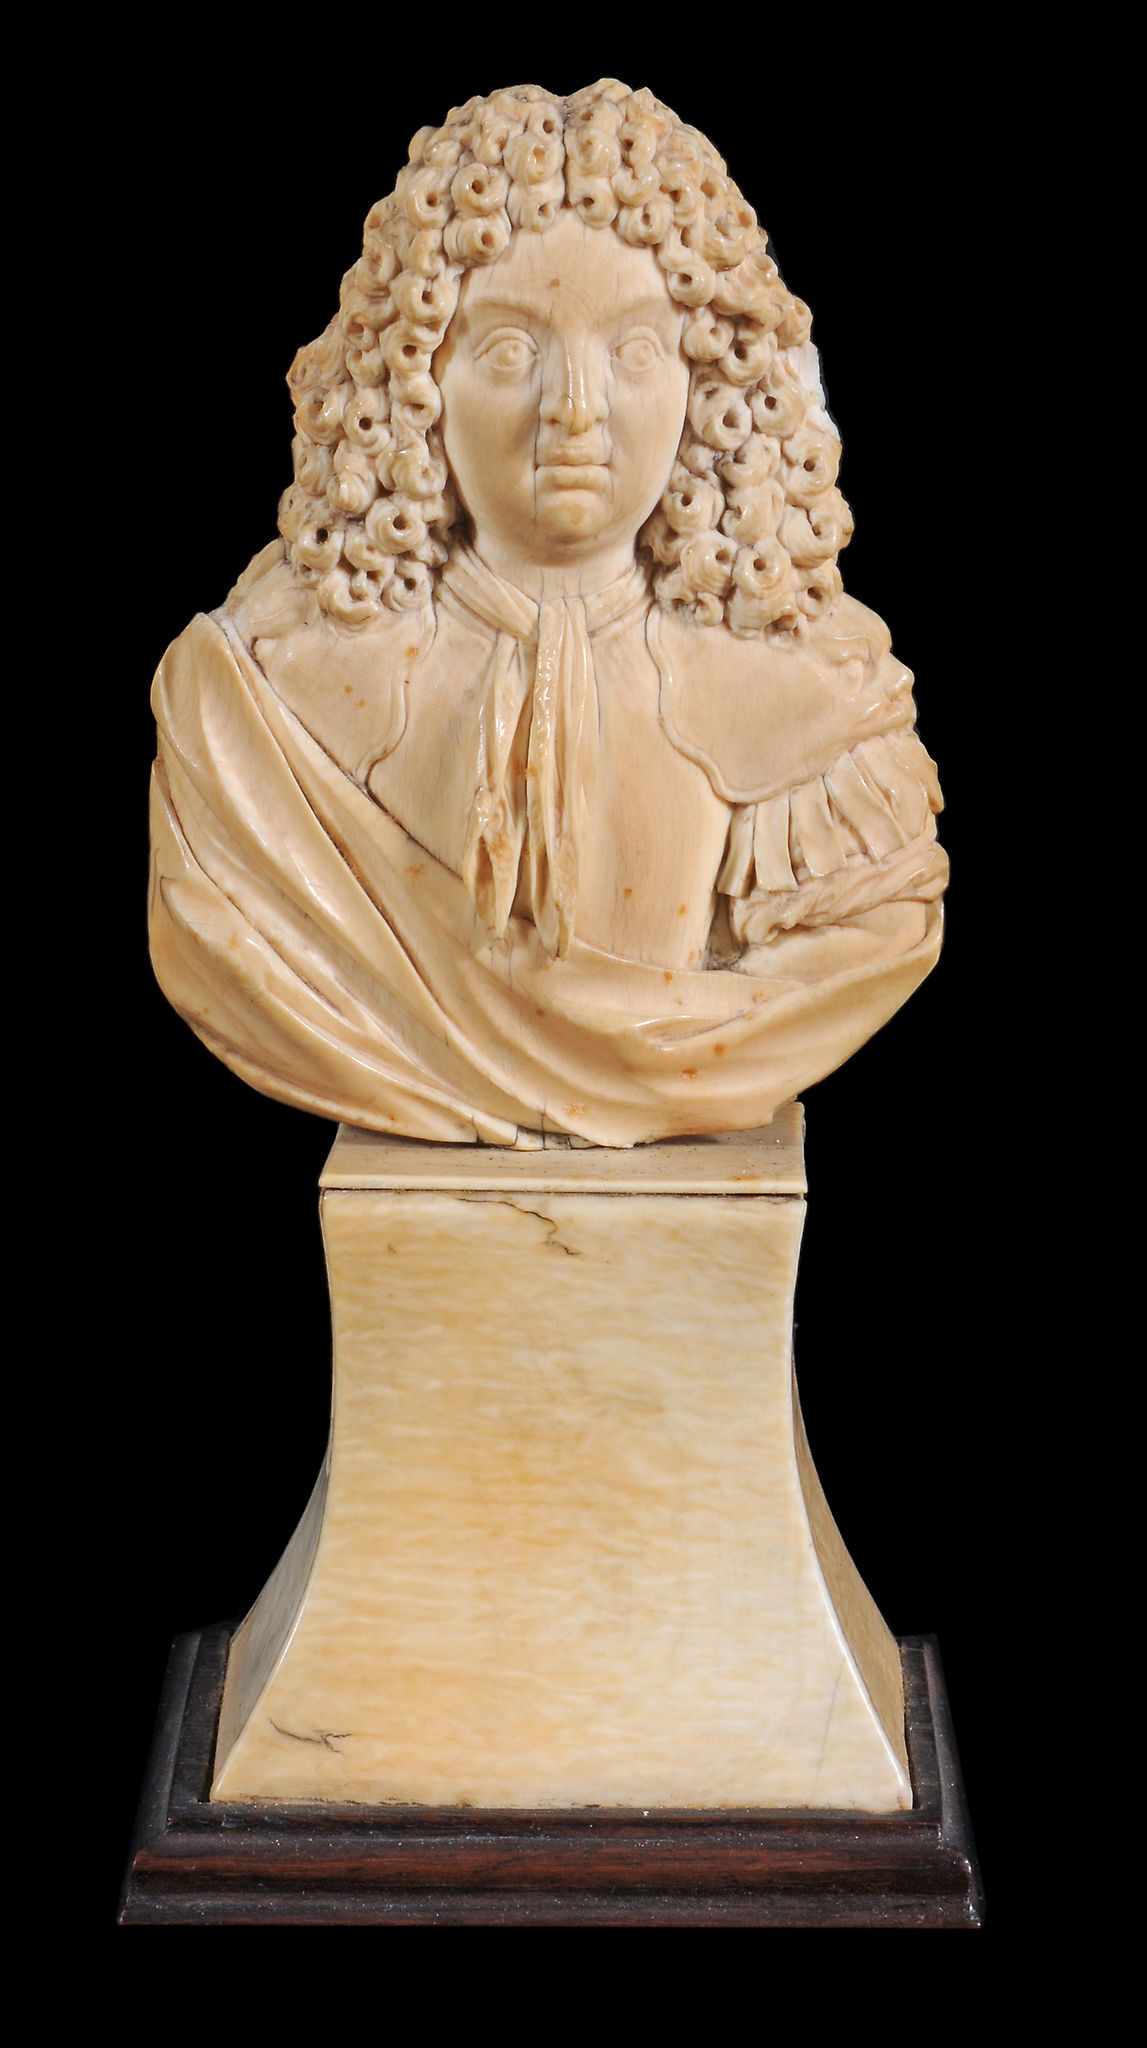 A relief carved ivory bust of a French nobleman, French, circa 1700, full face with long curly hair,